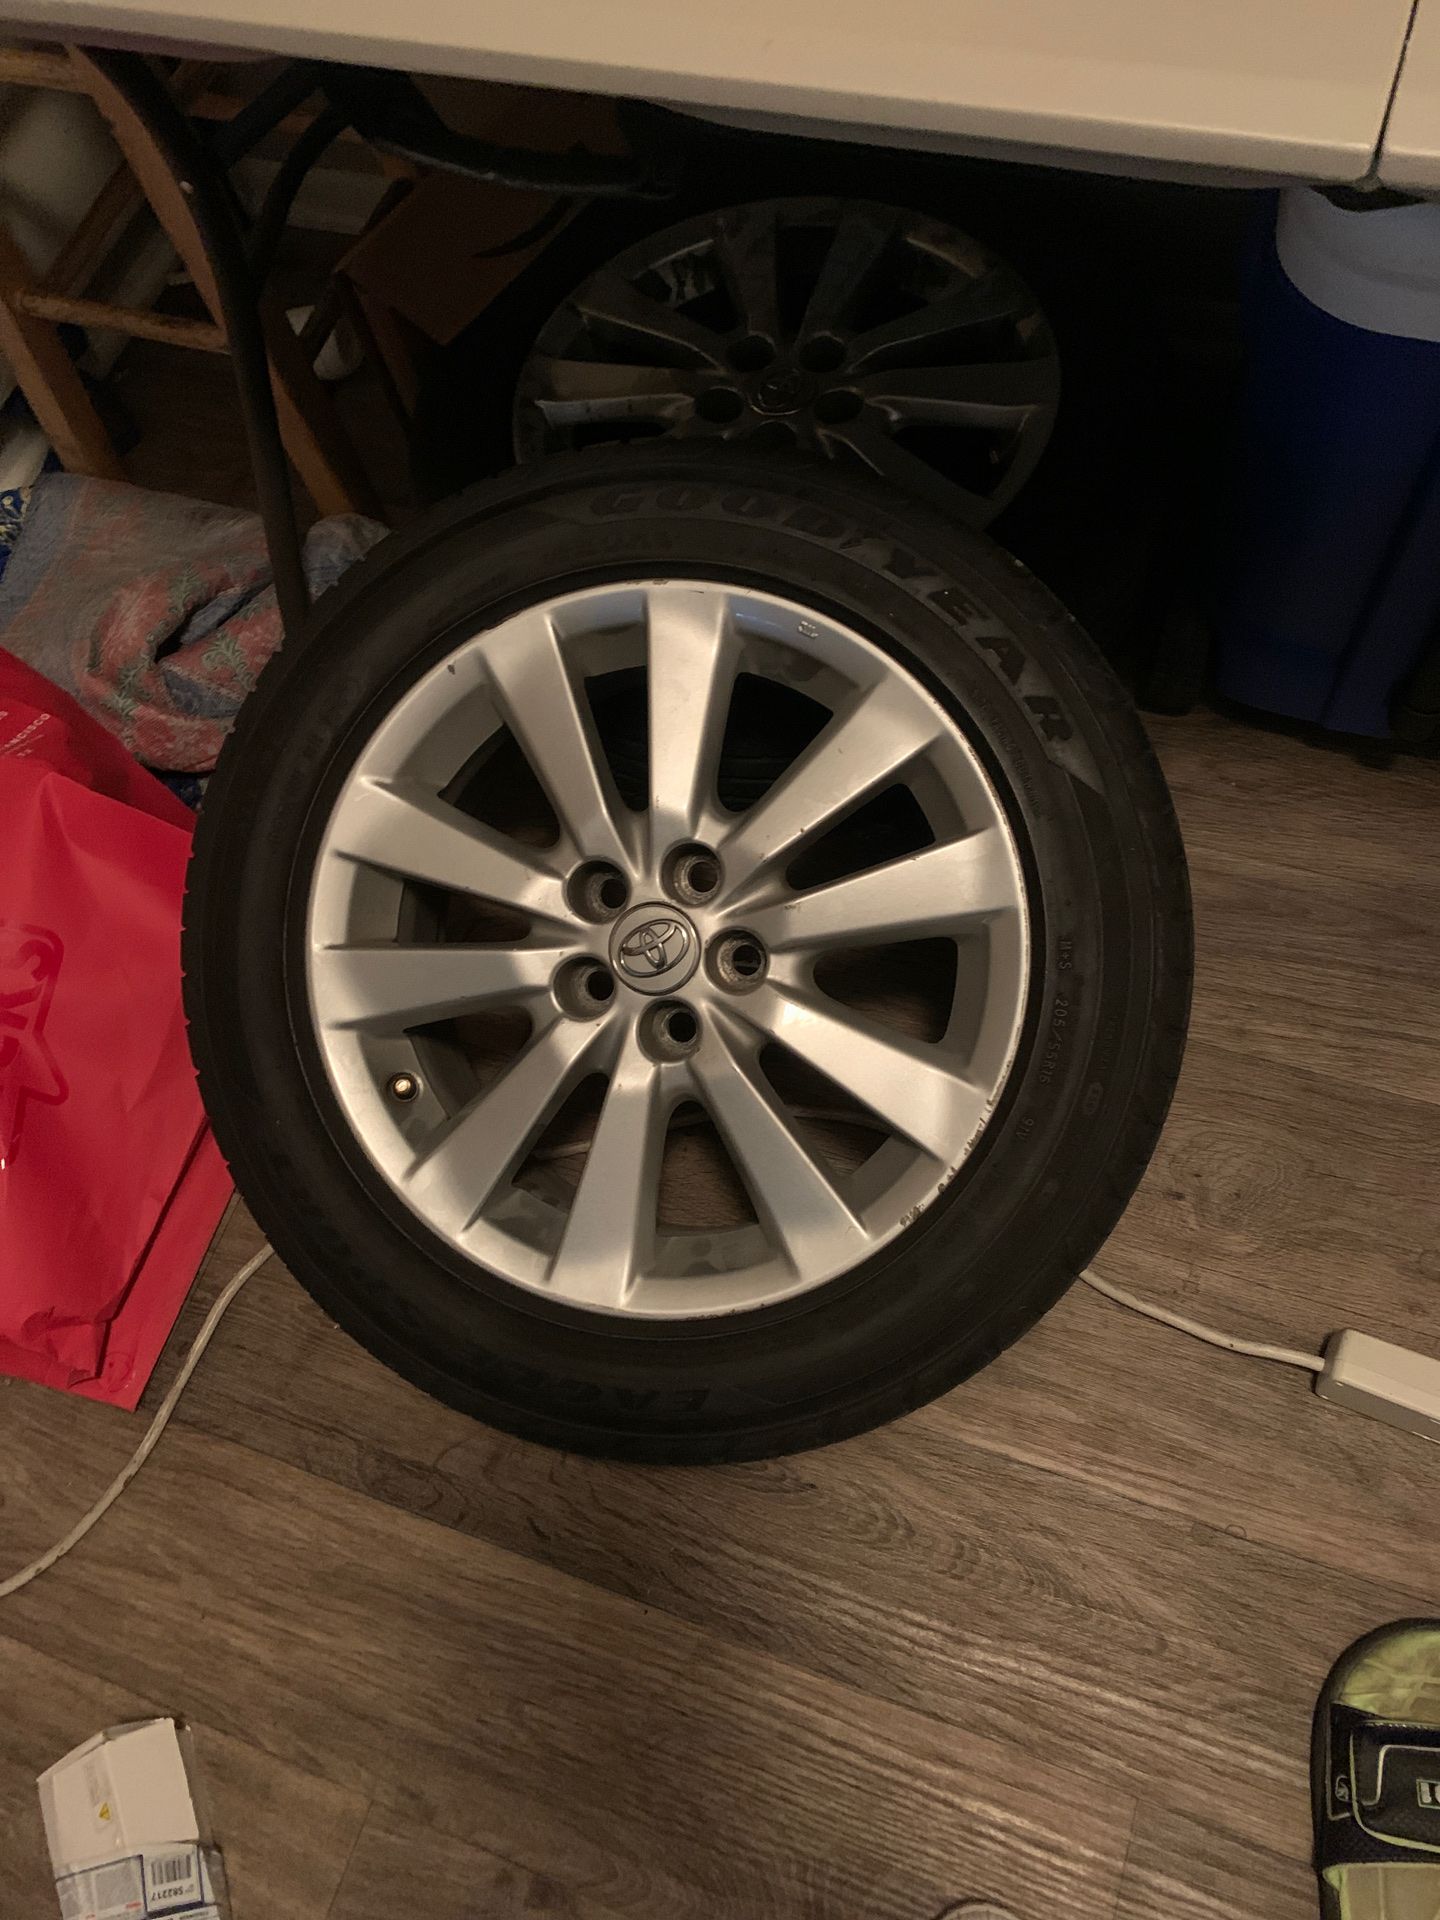 Toyota Corolla tire 2010 sport number 205/55R16